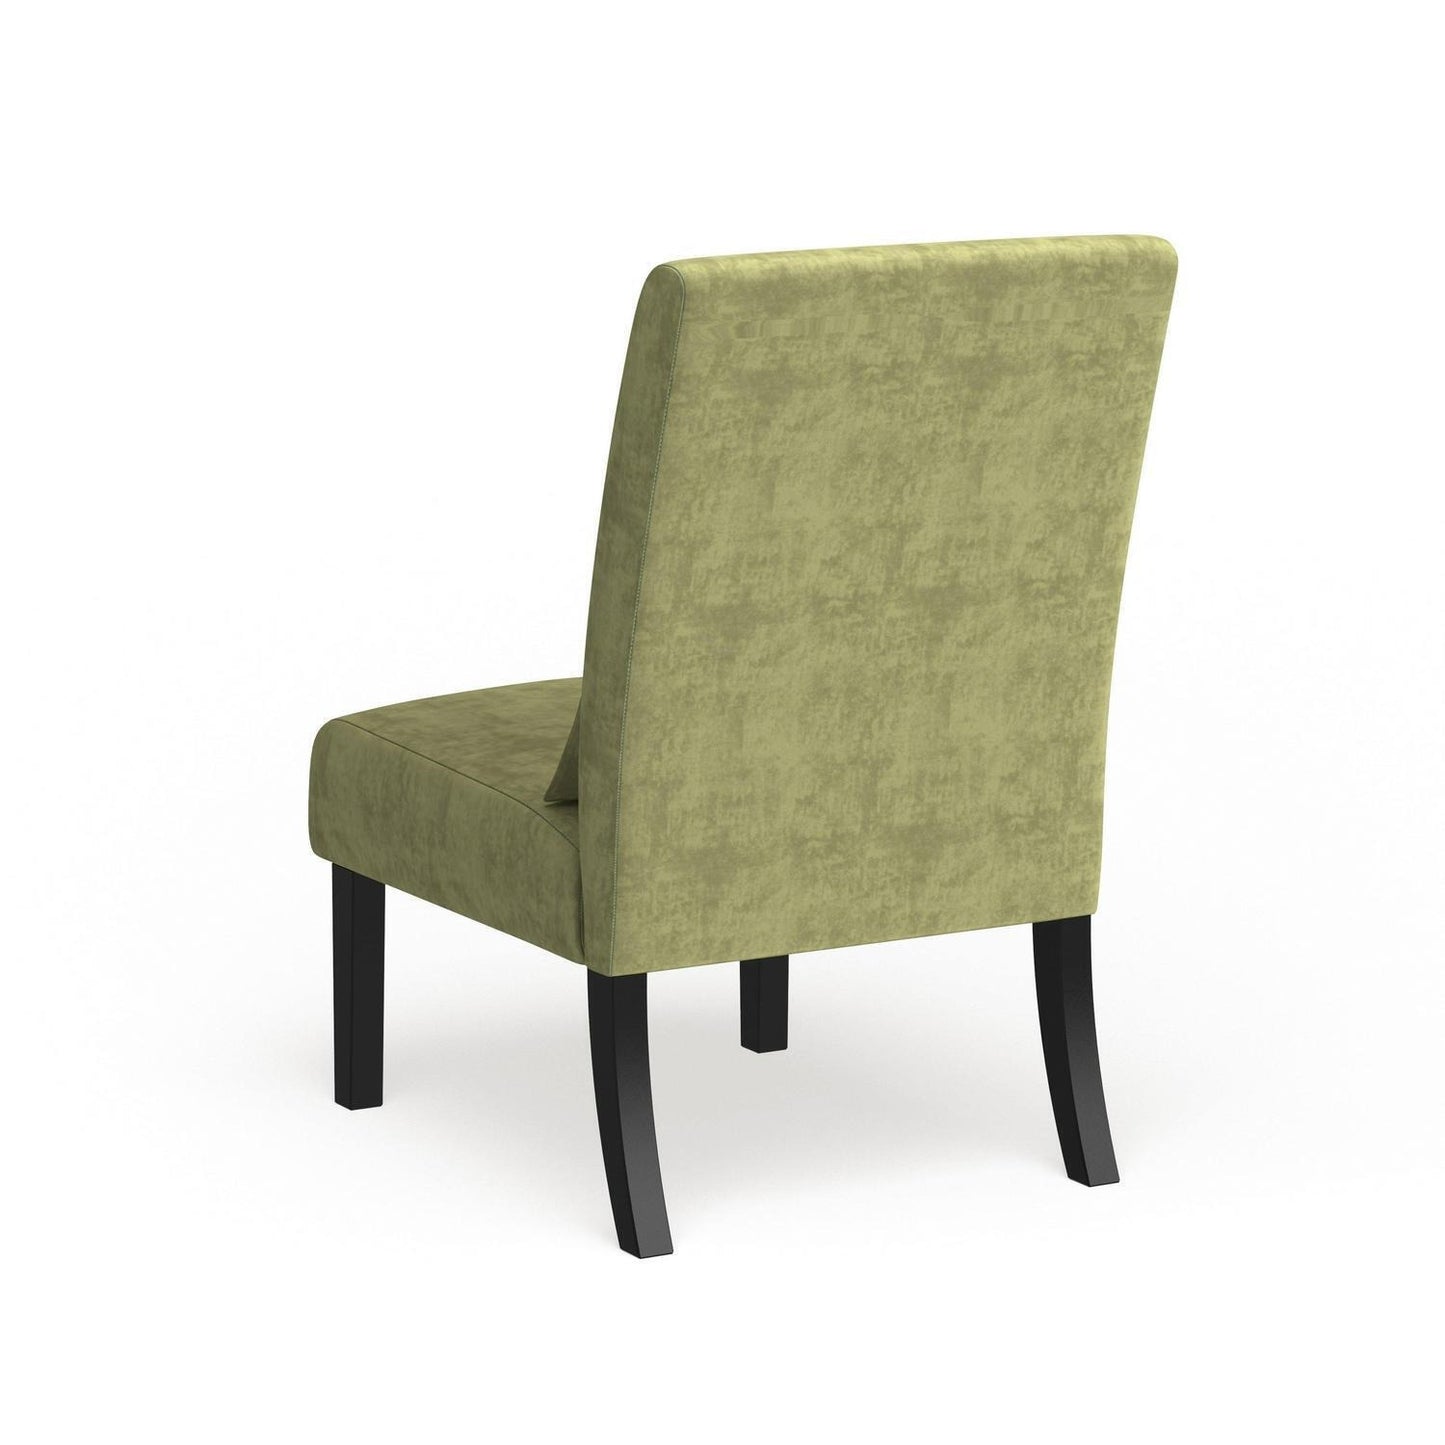 Green Chenille Fabric Accent Chair w/Matching Pillow - Livingroom, Bedroom